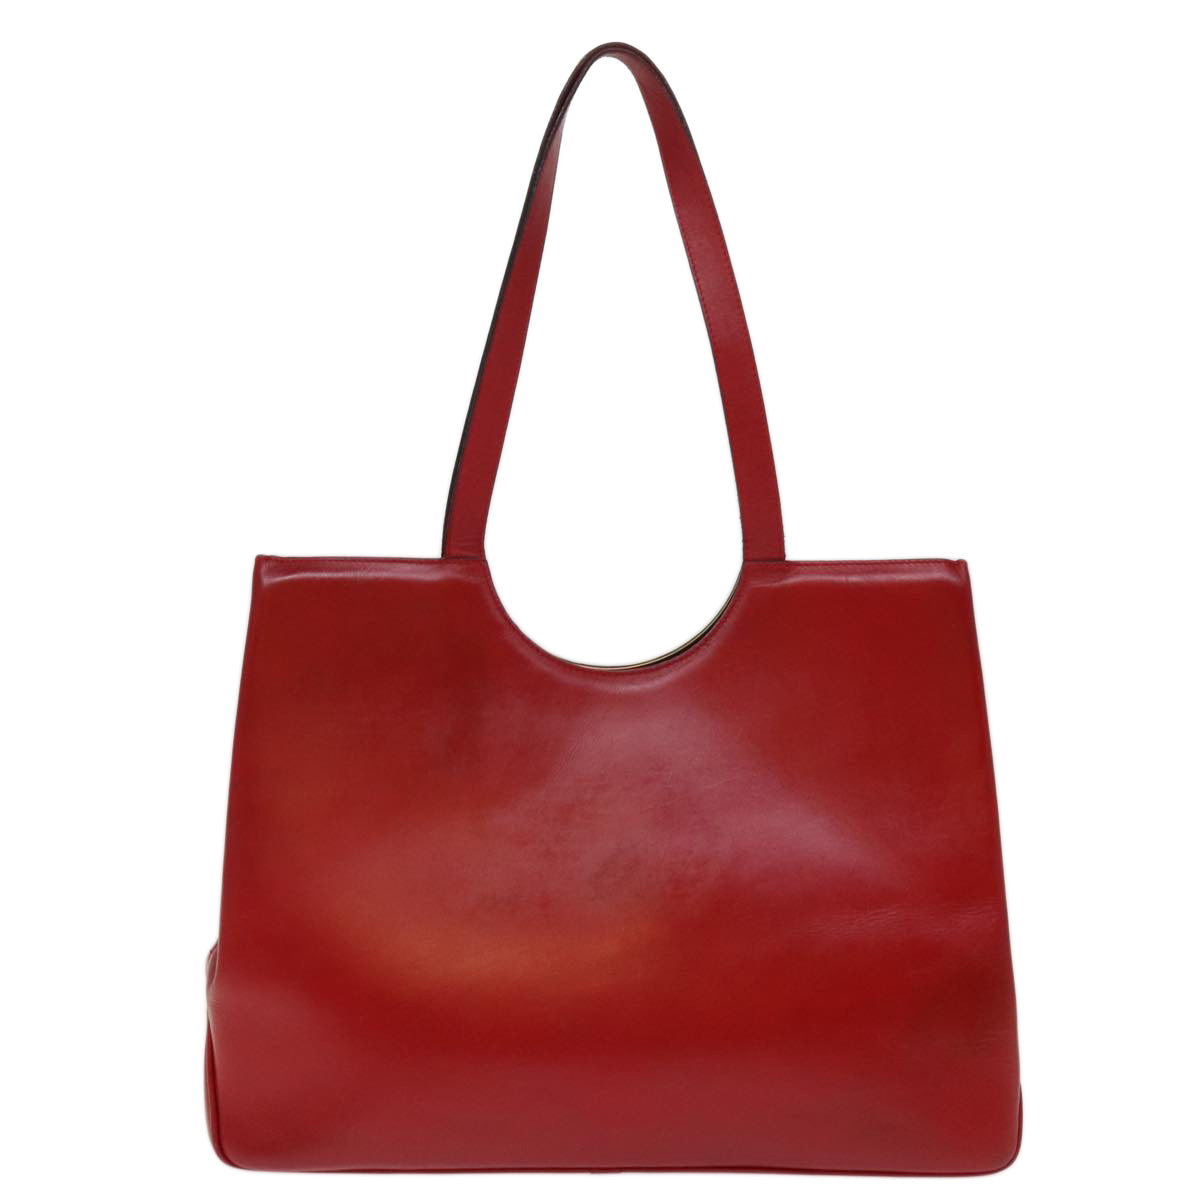 CELINE Tote Bag Leather Red Auth 74549